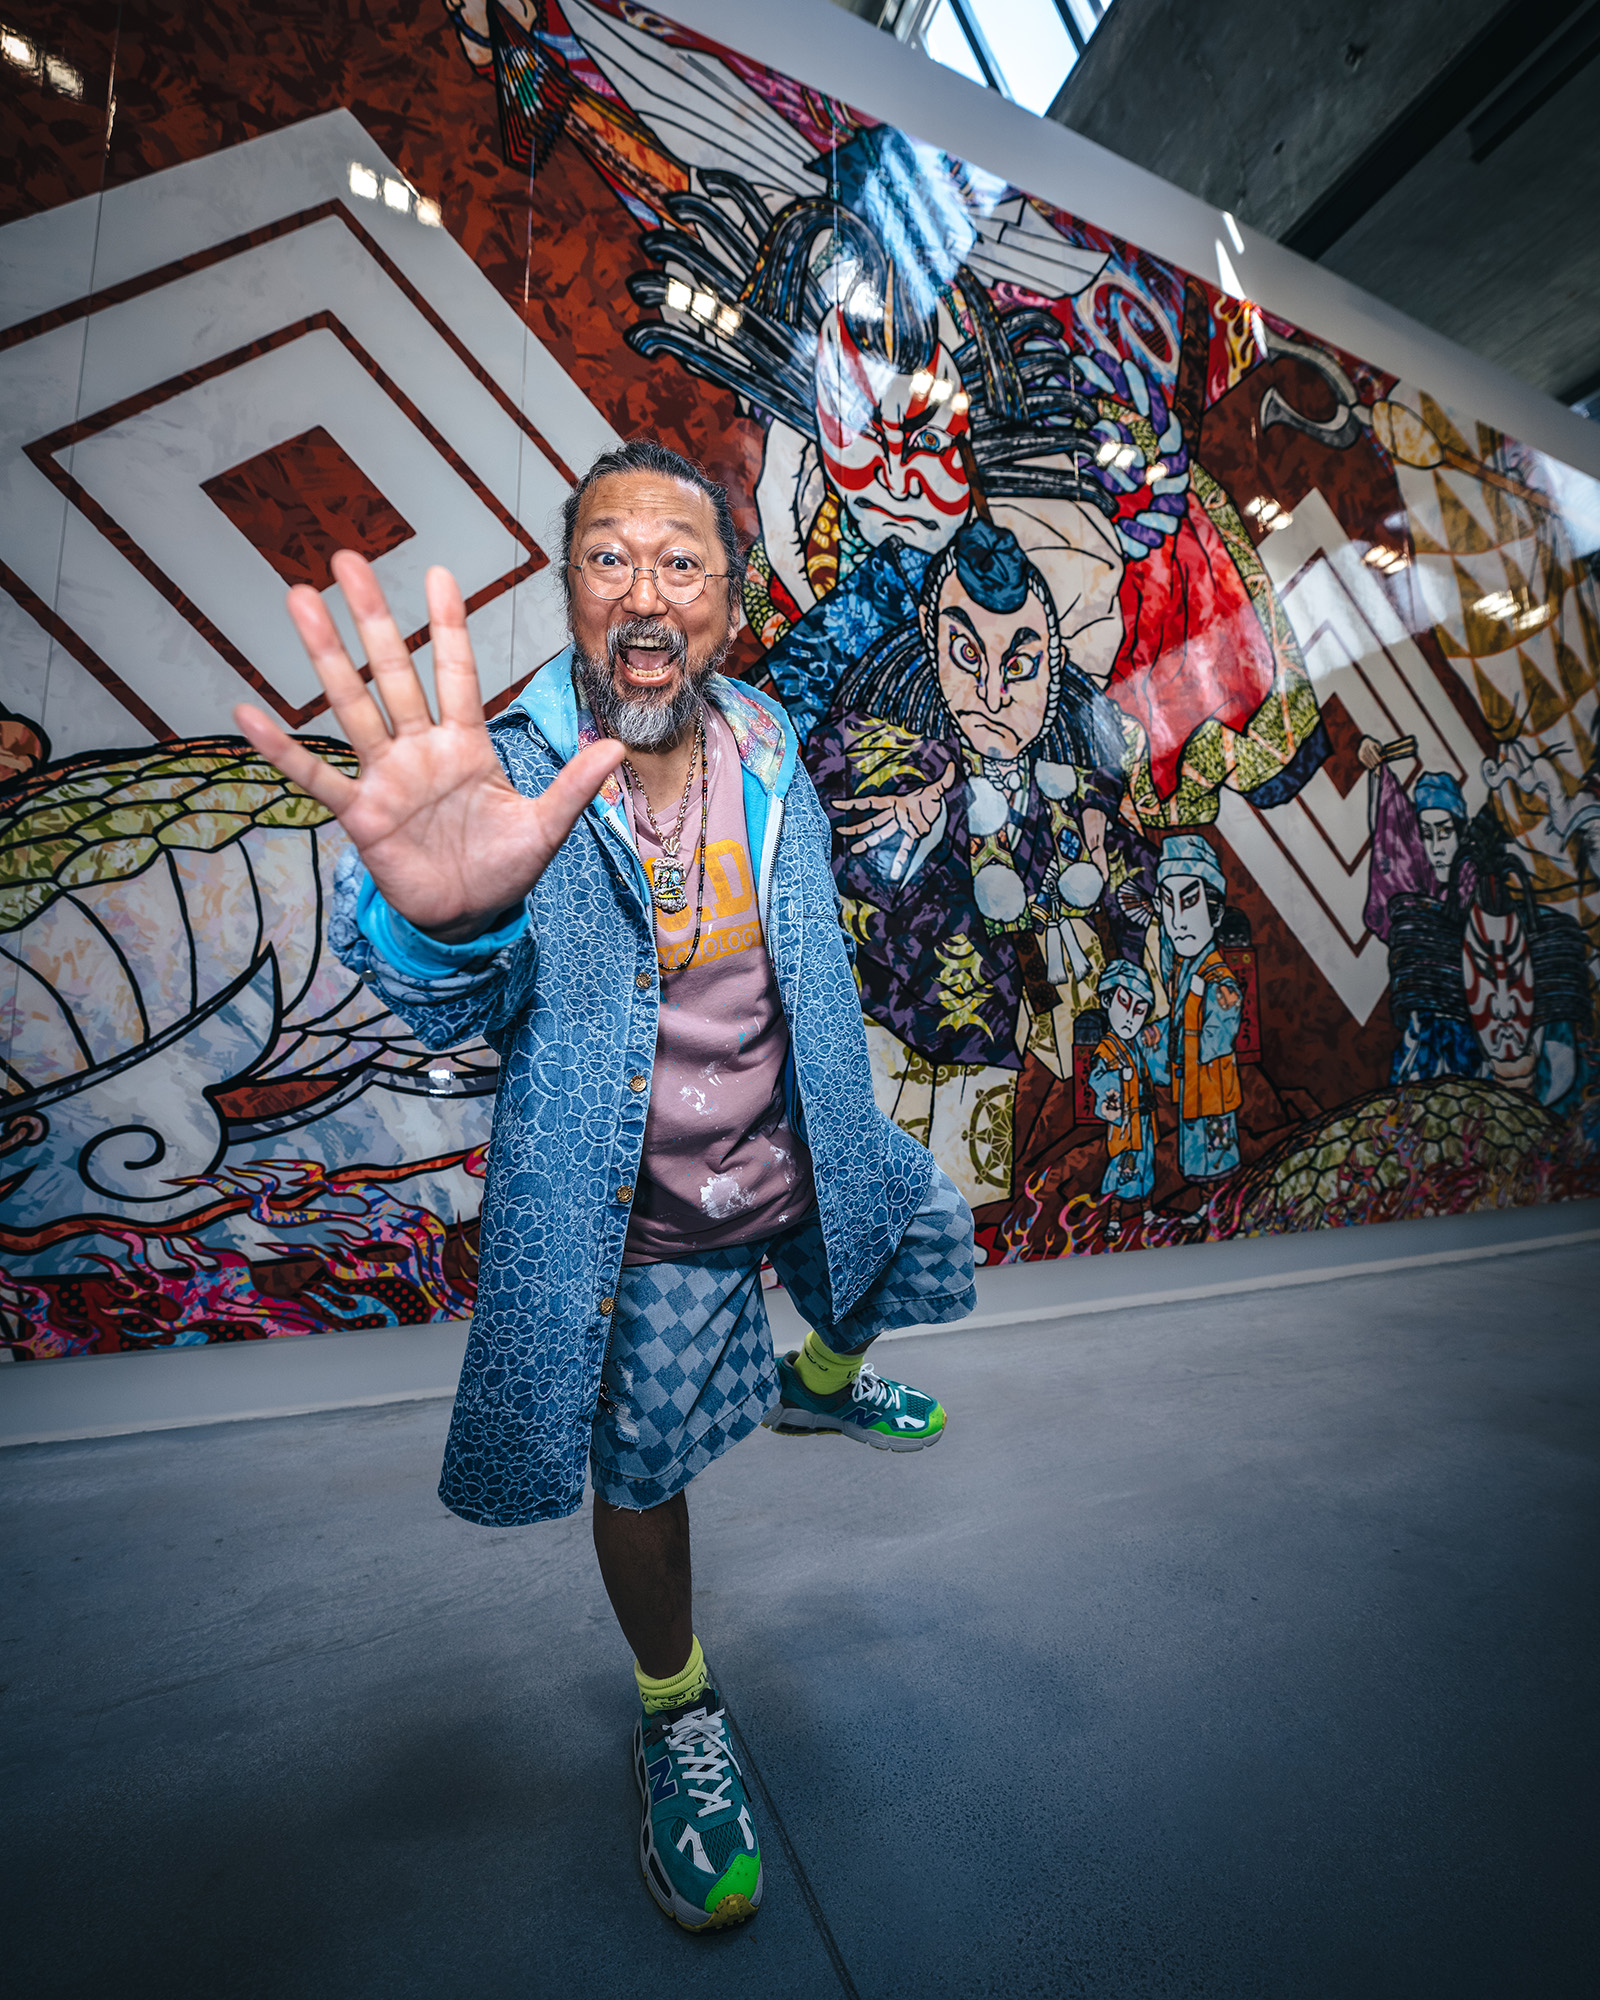 I'm Like a Hoarder': Takashi Murakami on His Impulsive Collecting Style,  and Why He Still Believes in the Power of NFTs